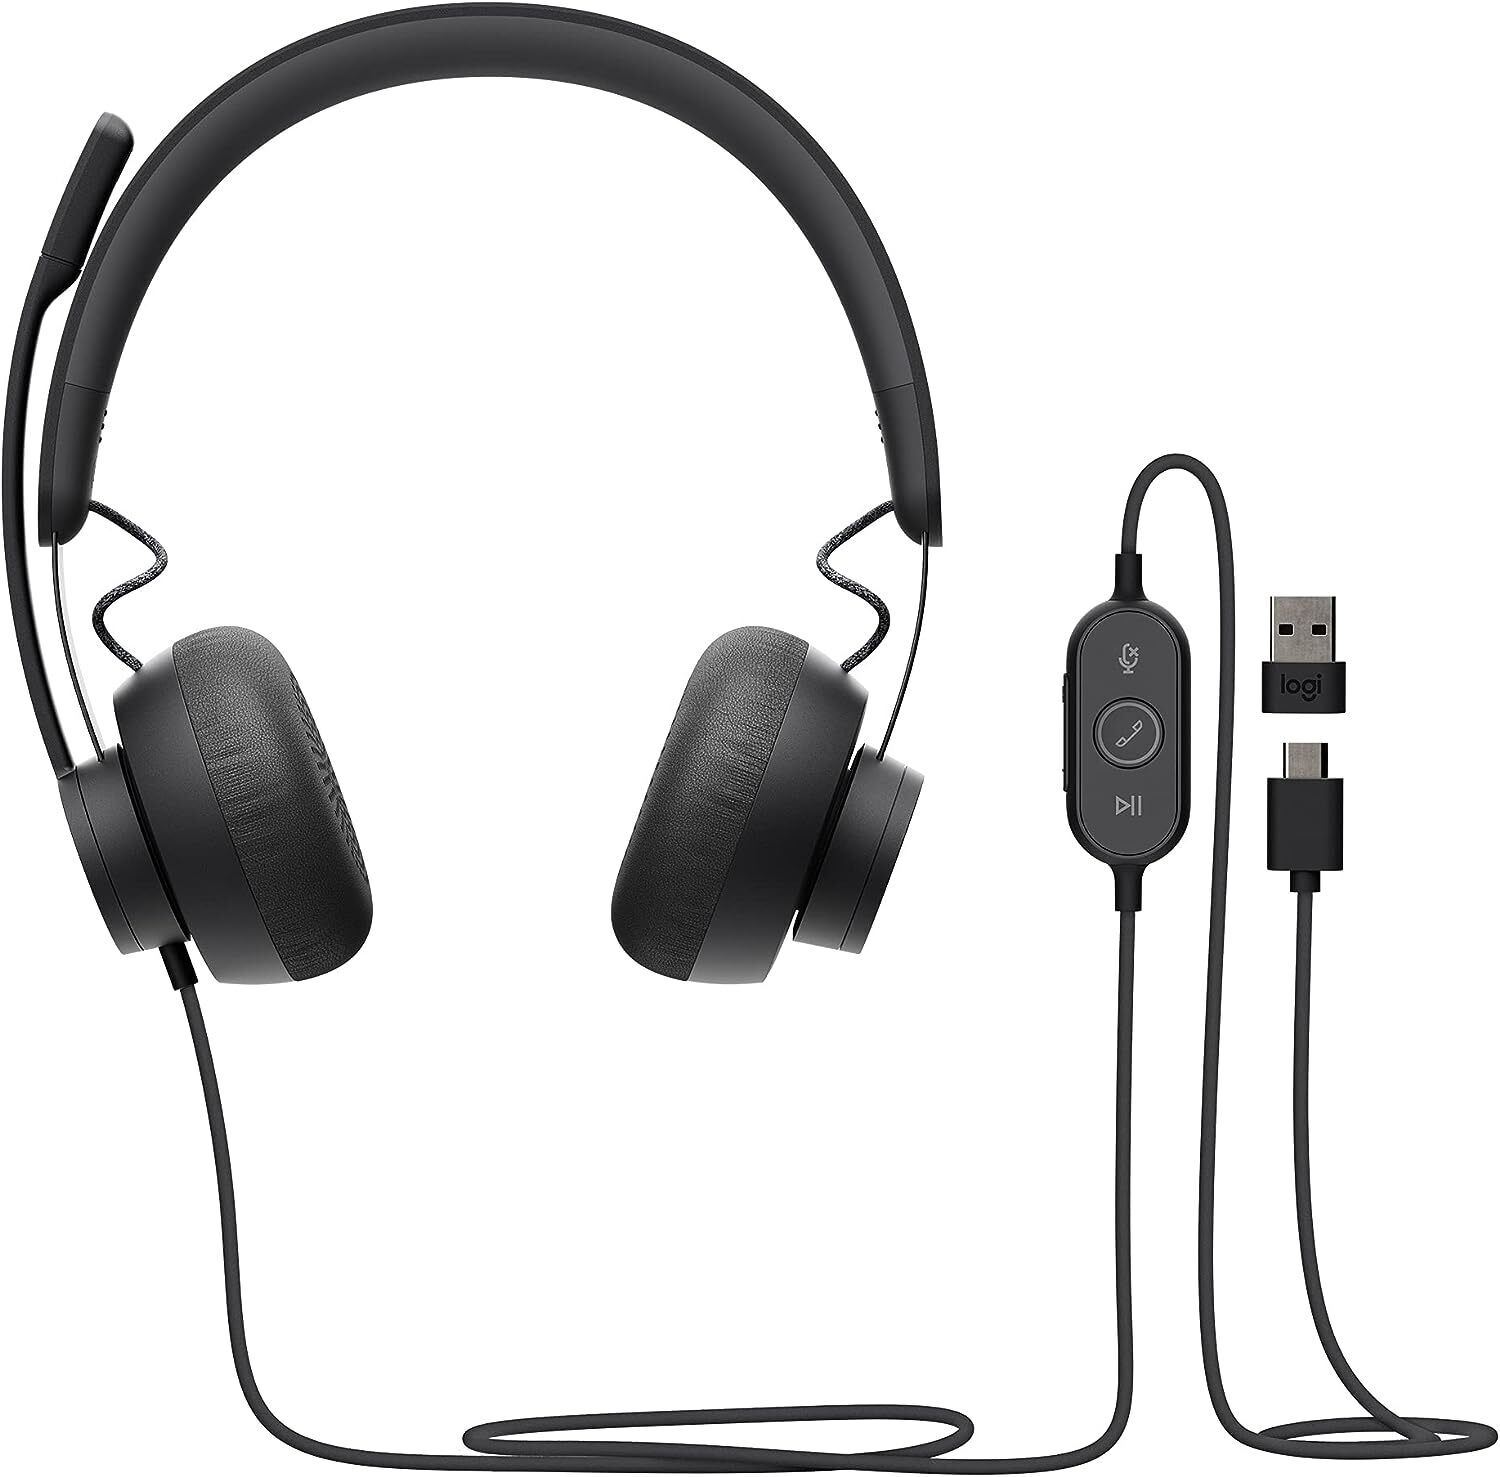 Logitech Zone Wired Headset 981-000871 Microsoft Teams with noise-canceling